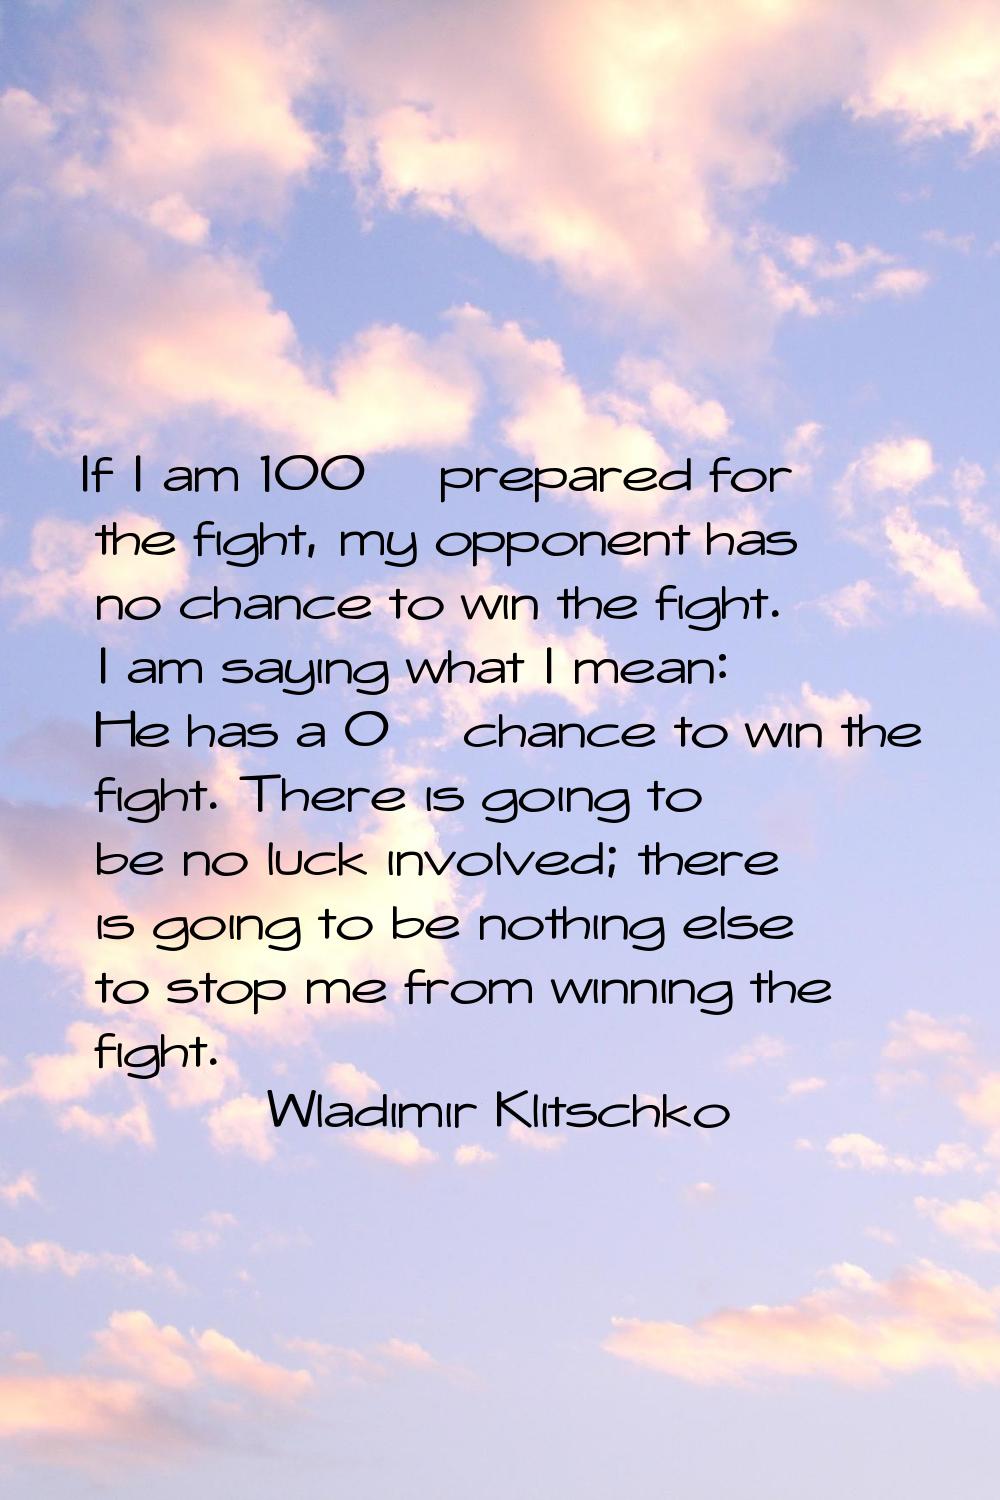 If I am 100% prepared for the fight, my opponent has no chance to win the fight. I am saying what I